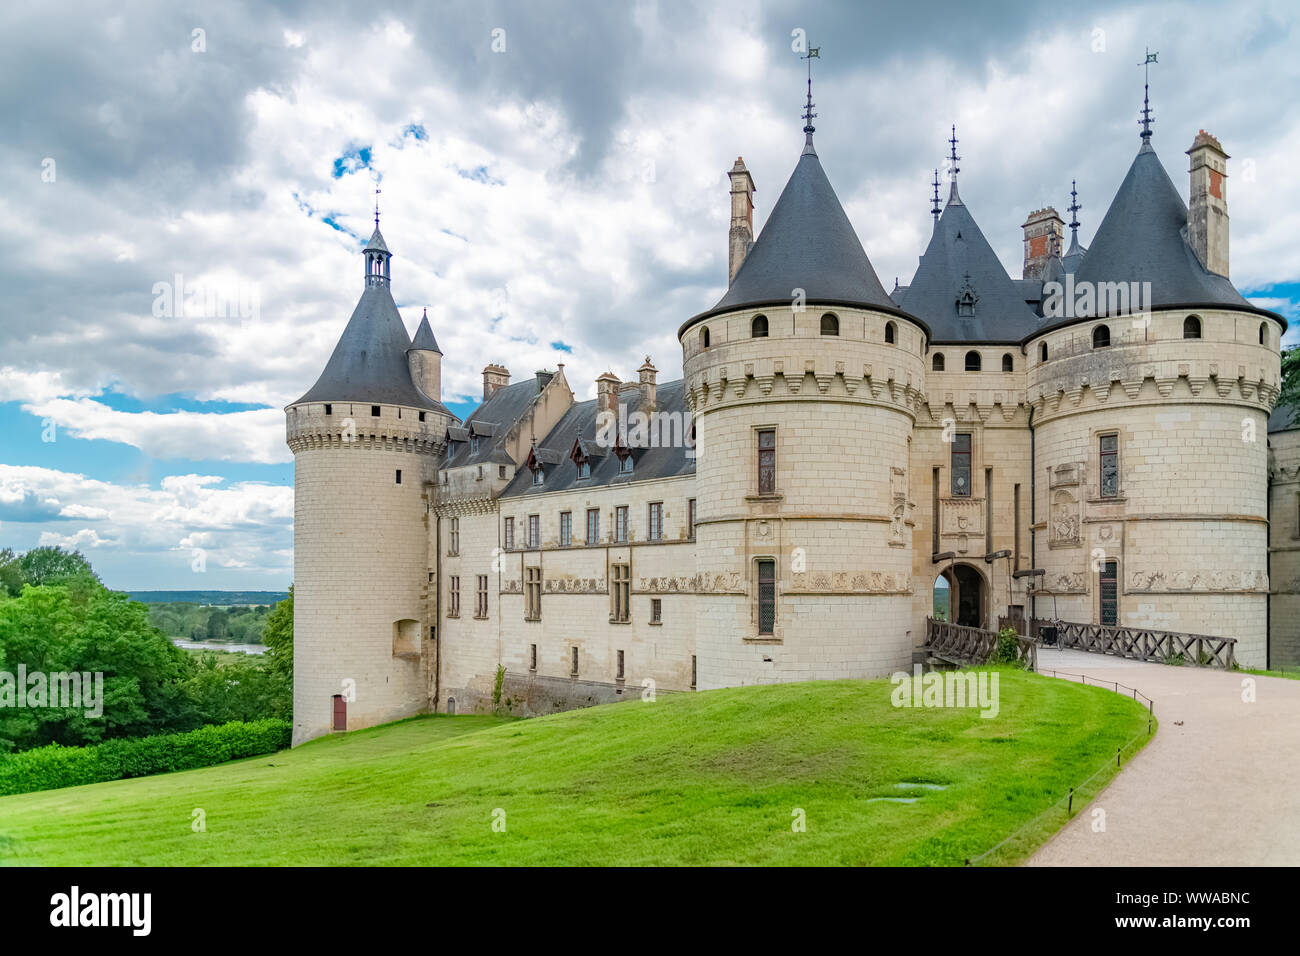 Chaumont-sur-Loire castle, beautiful French heritage, panorama Stock Photo